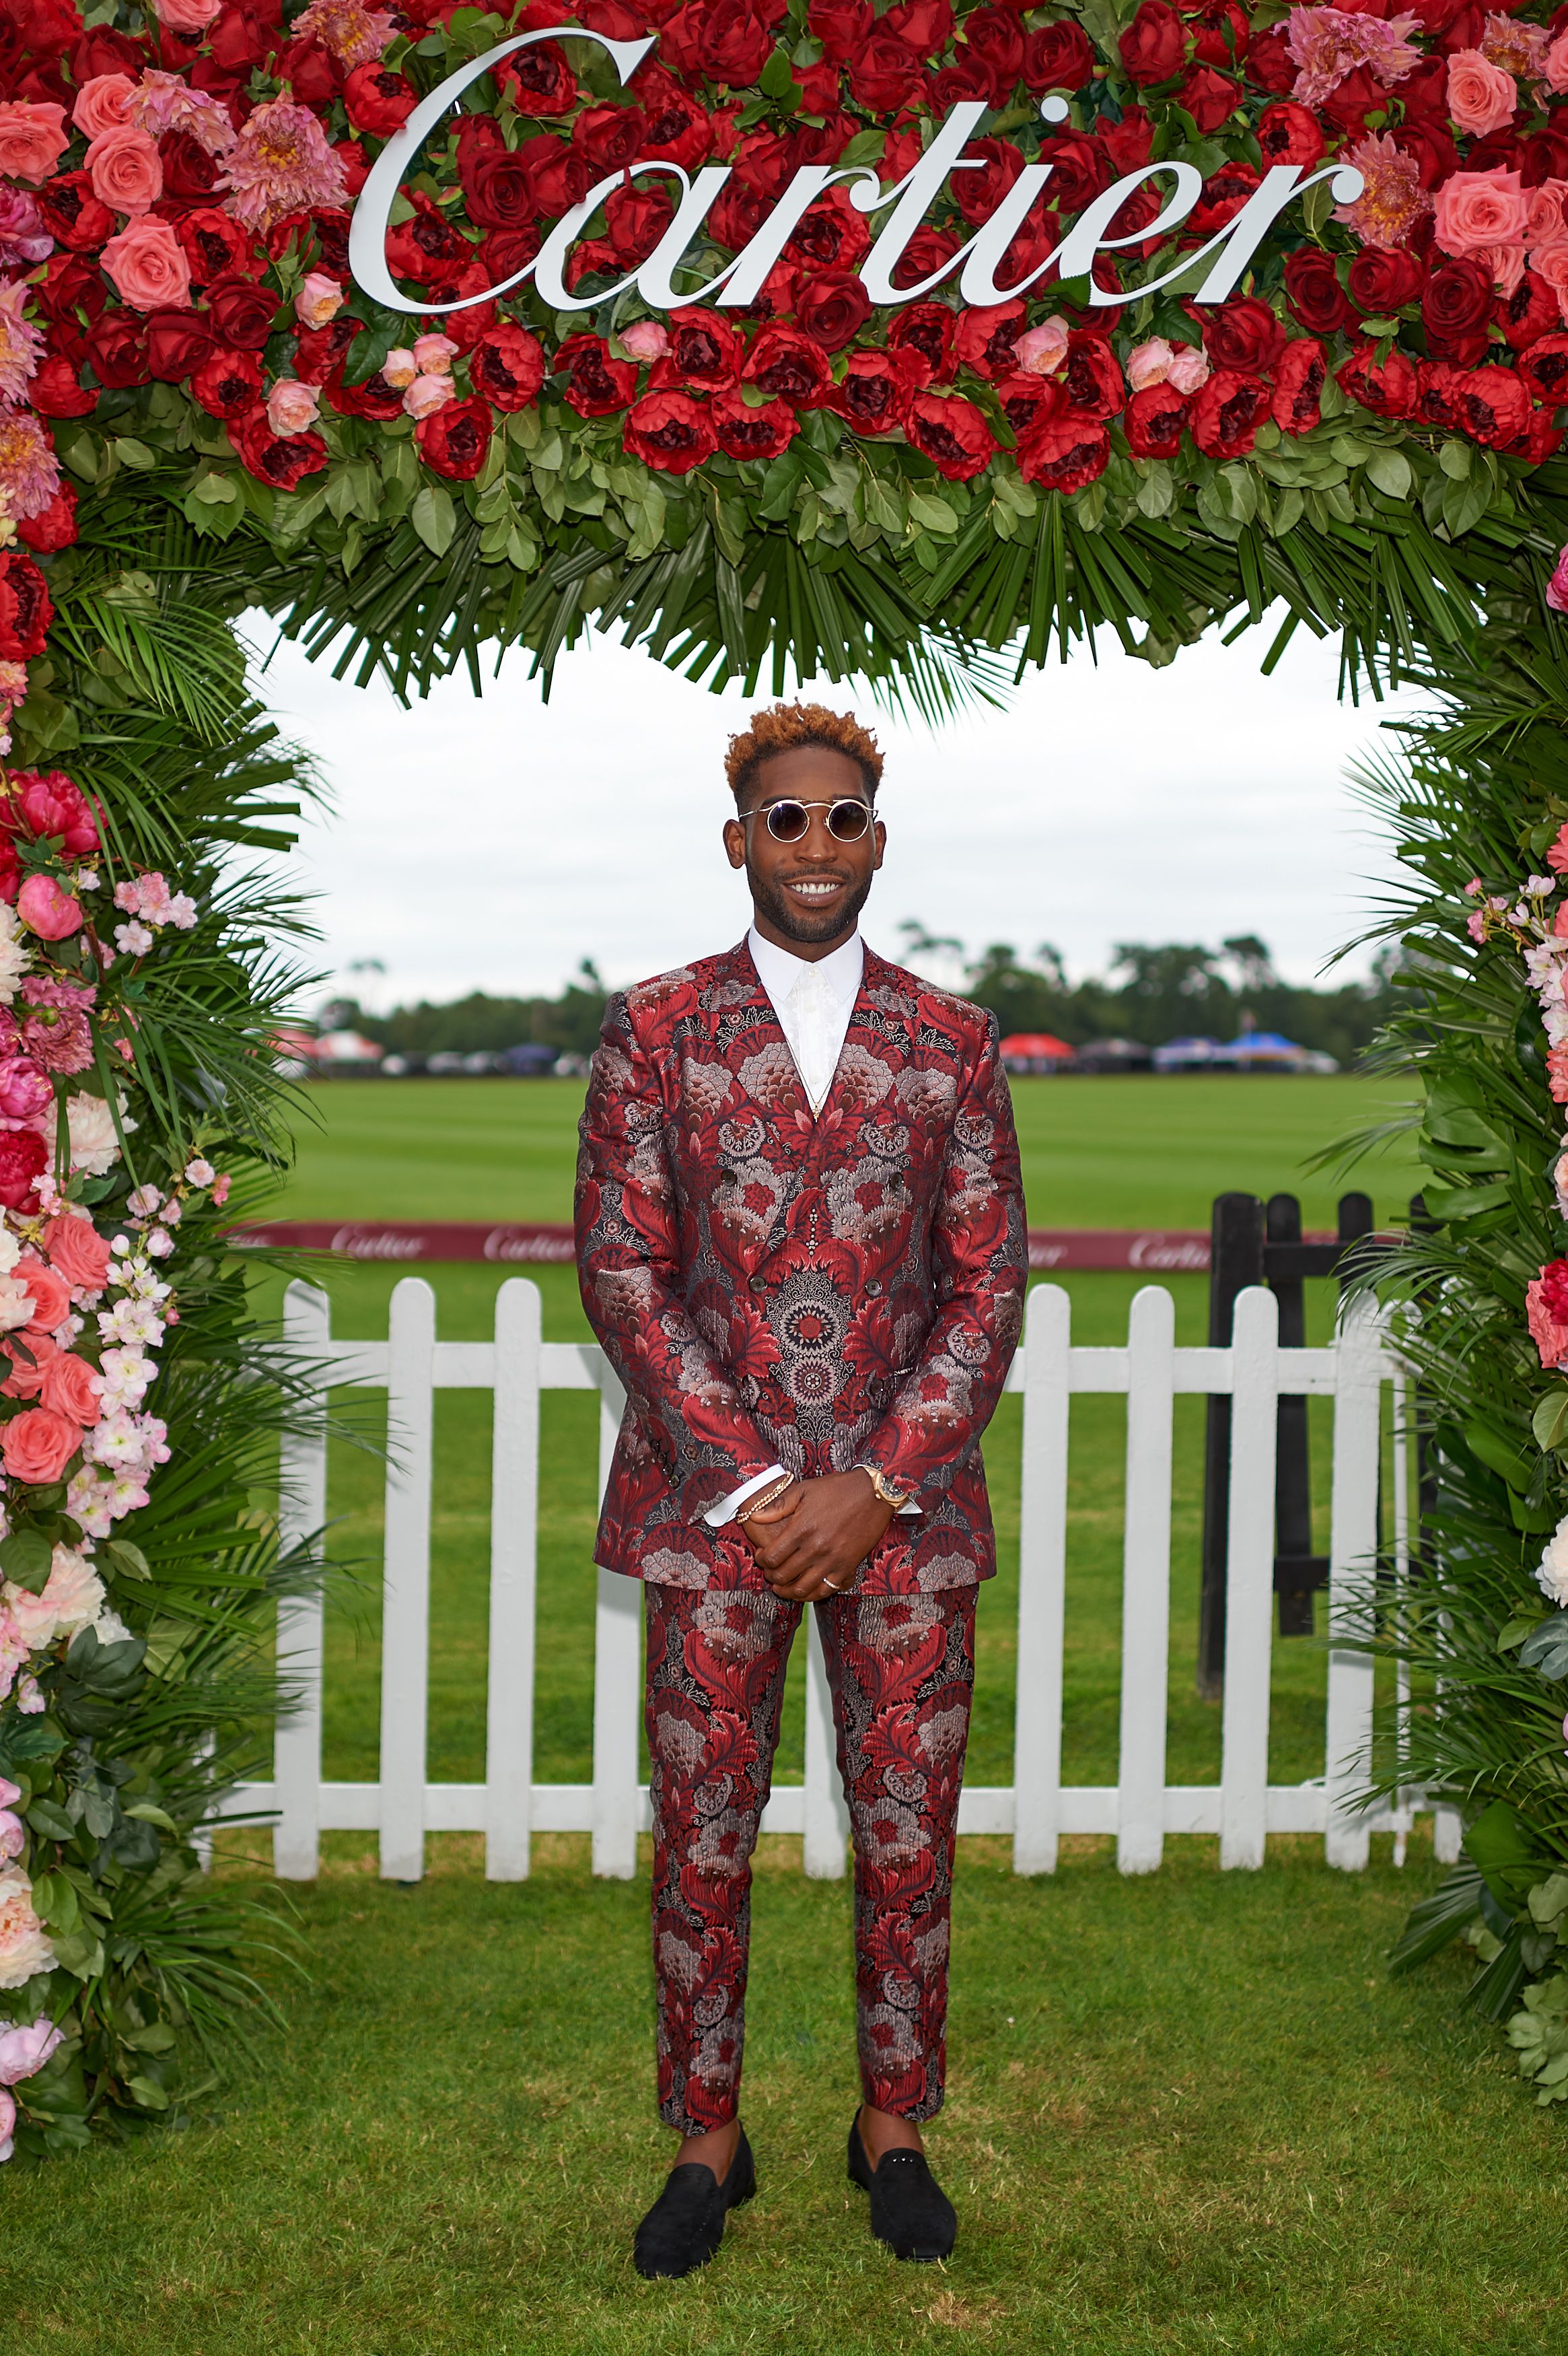 cartier gold cup 2018